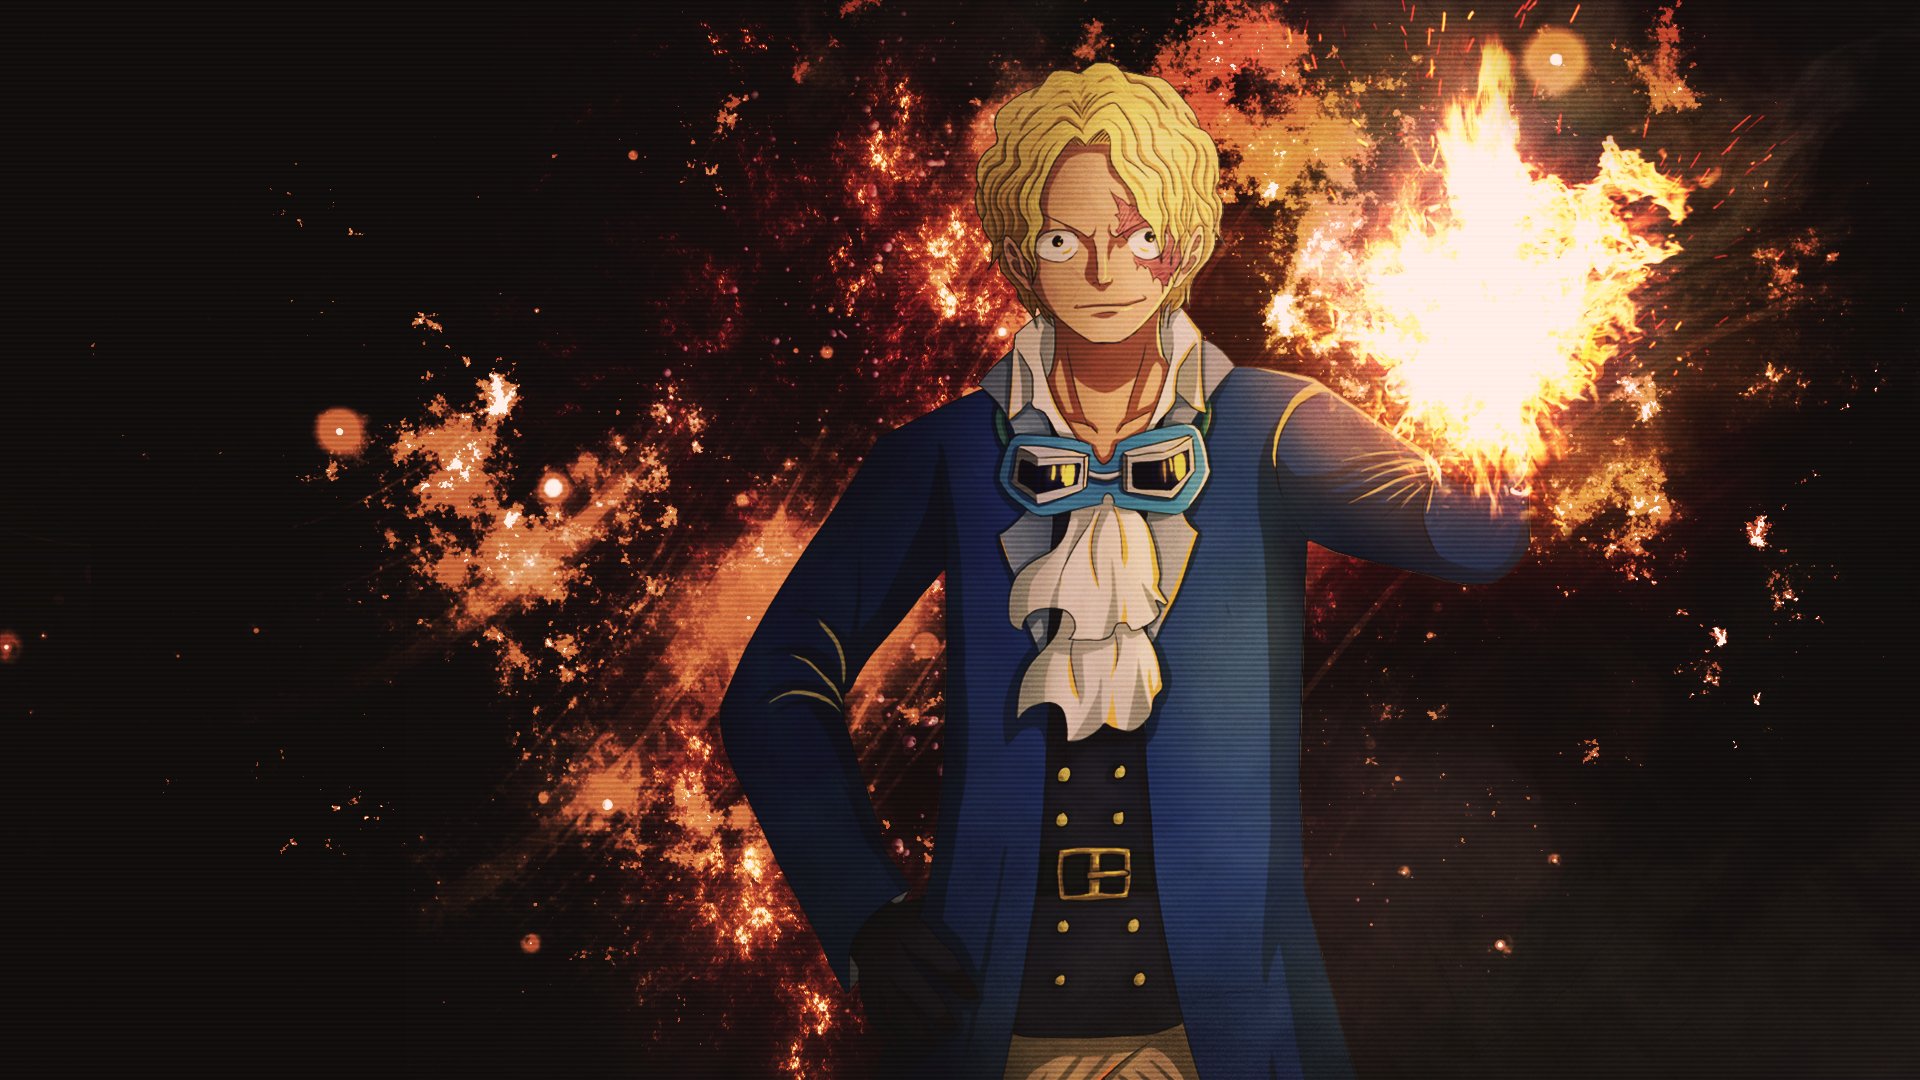 Sabo Hd One Piece Wallpaper Hd Anime 4k Wallpapers Images Photos And ...